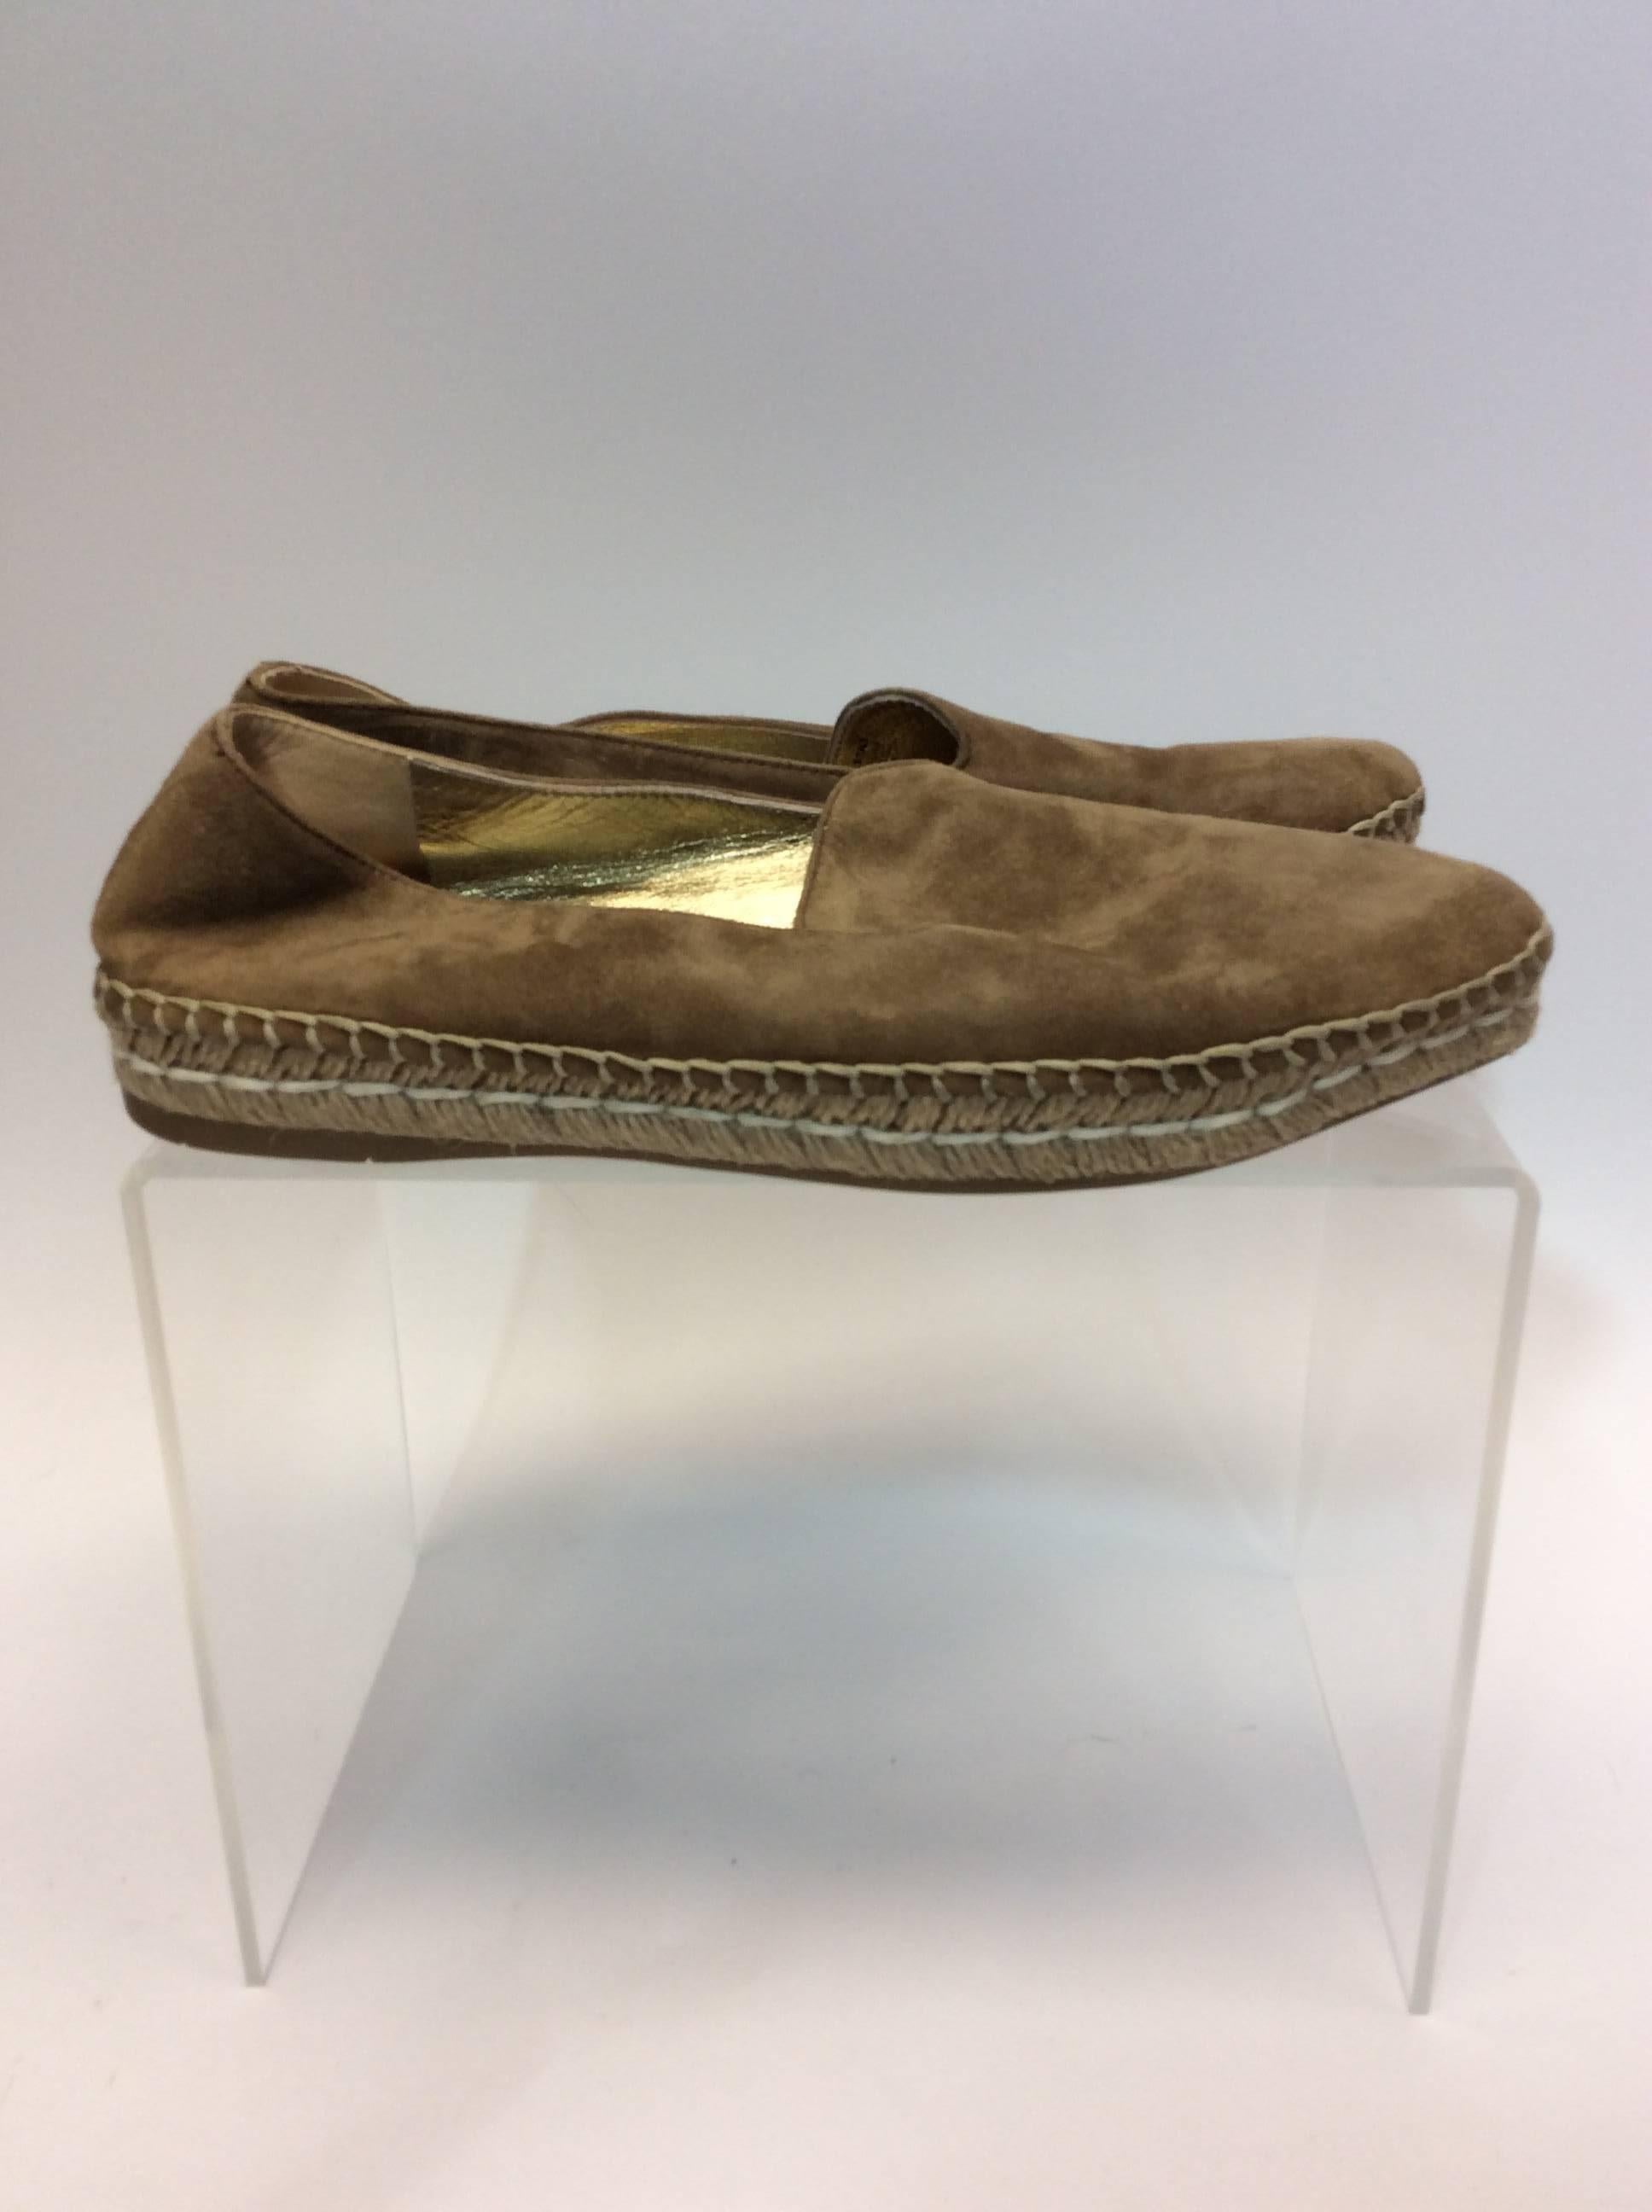 Prada Neutral Suede Espadrilles
$178
Made in Italy 
Size 37
Almond toe style
